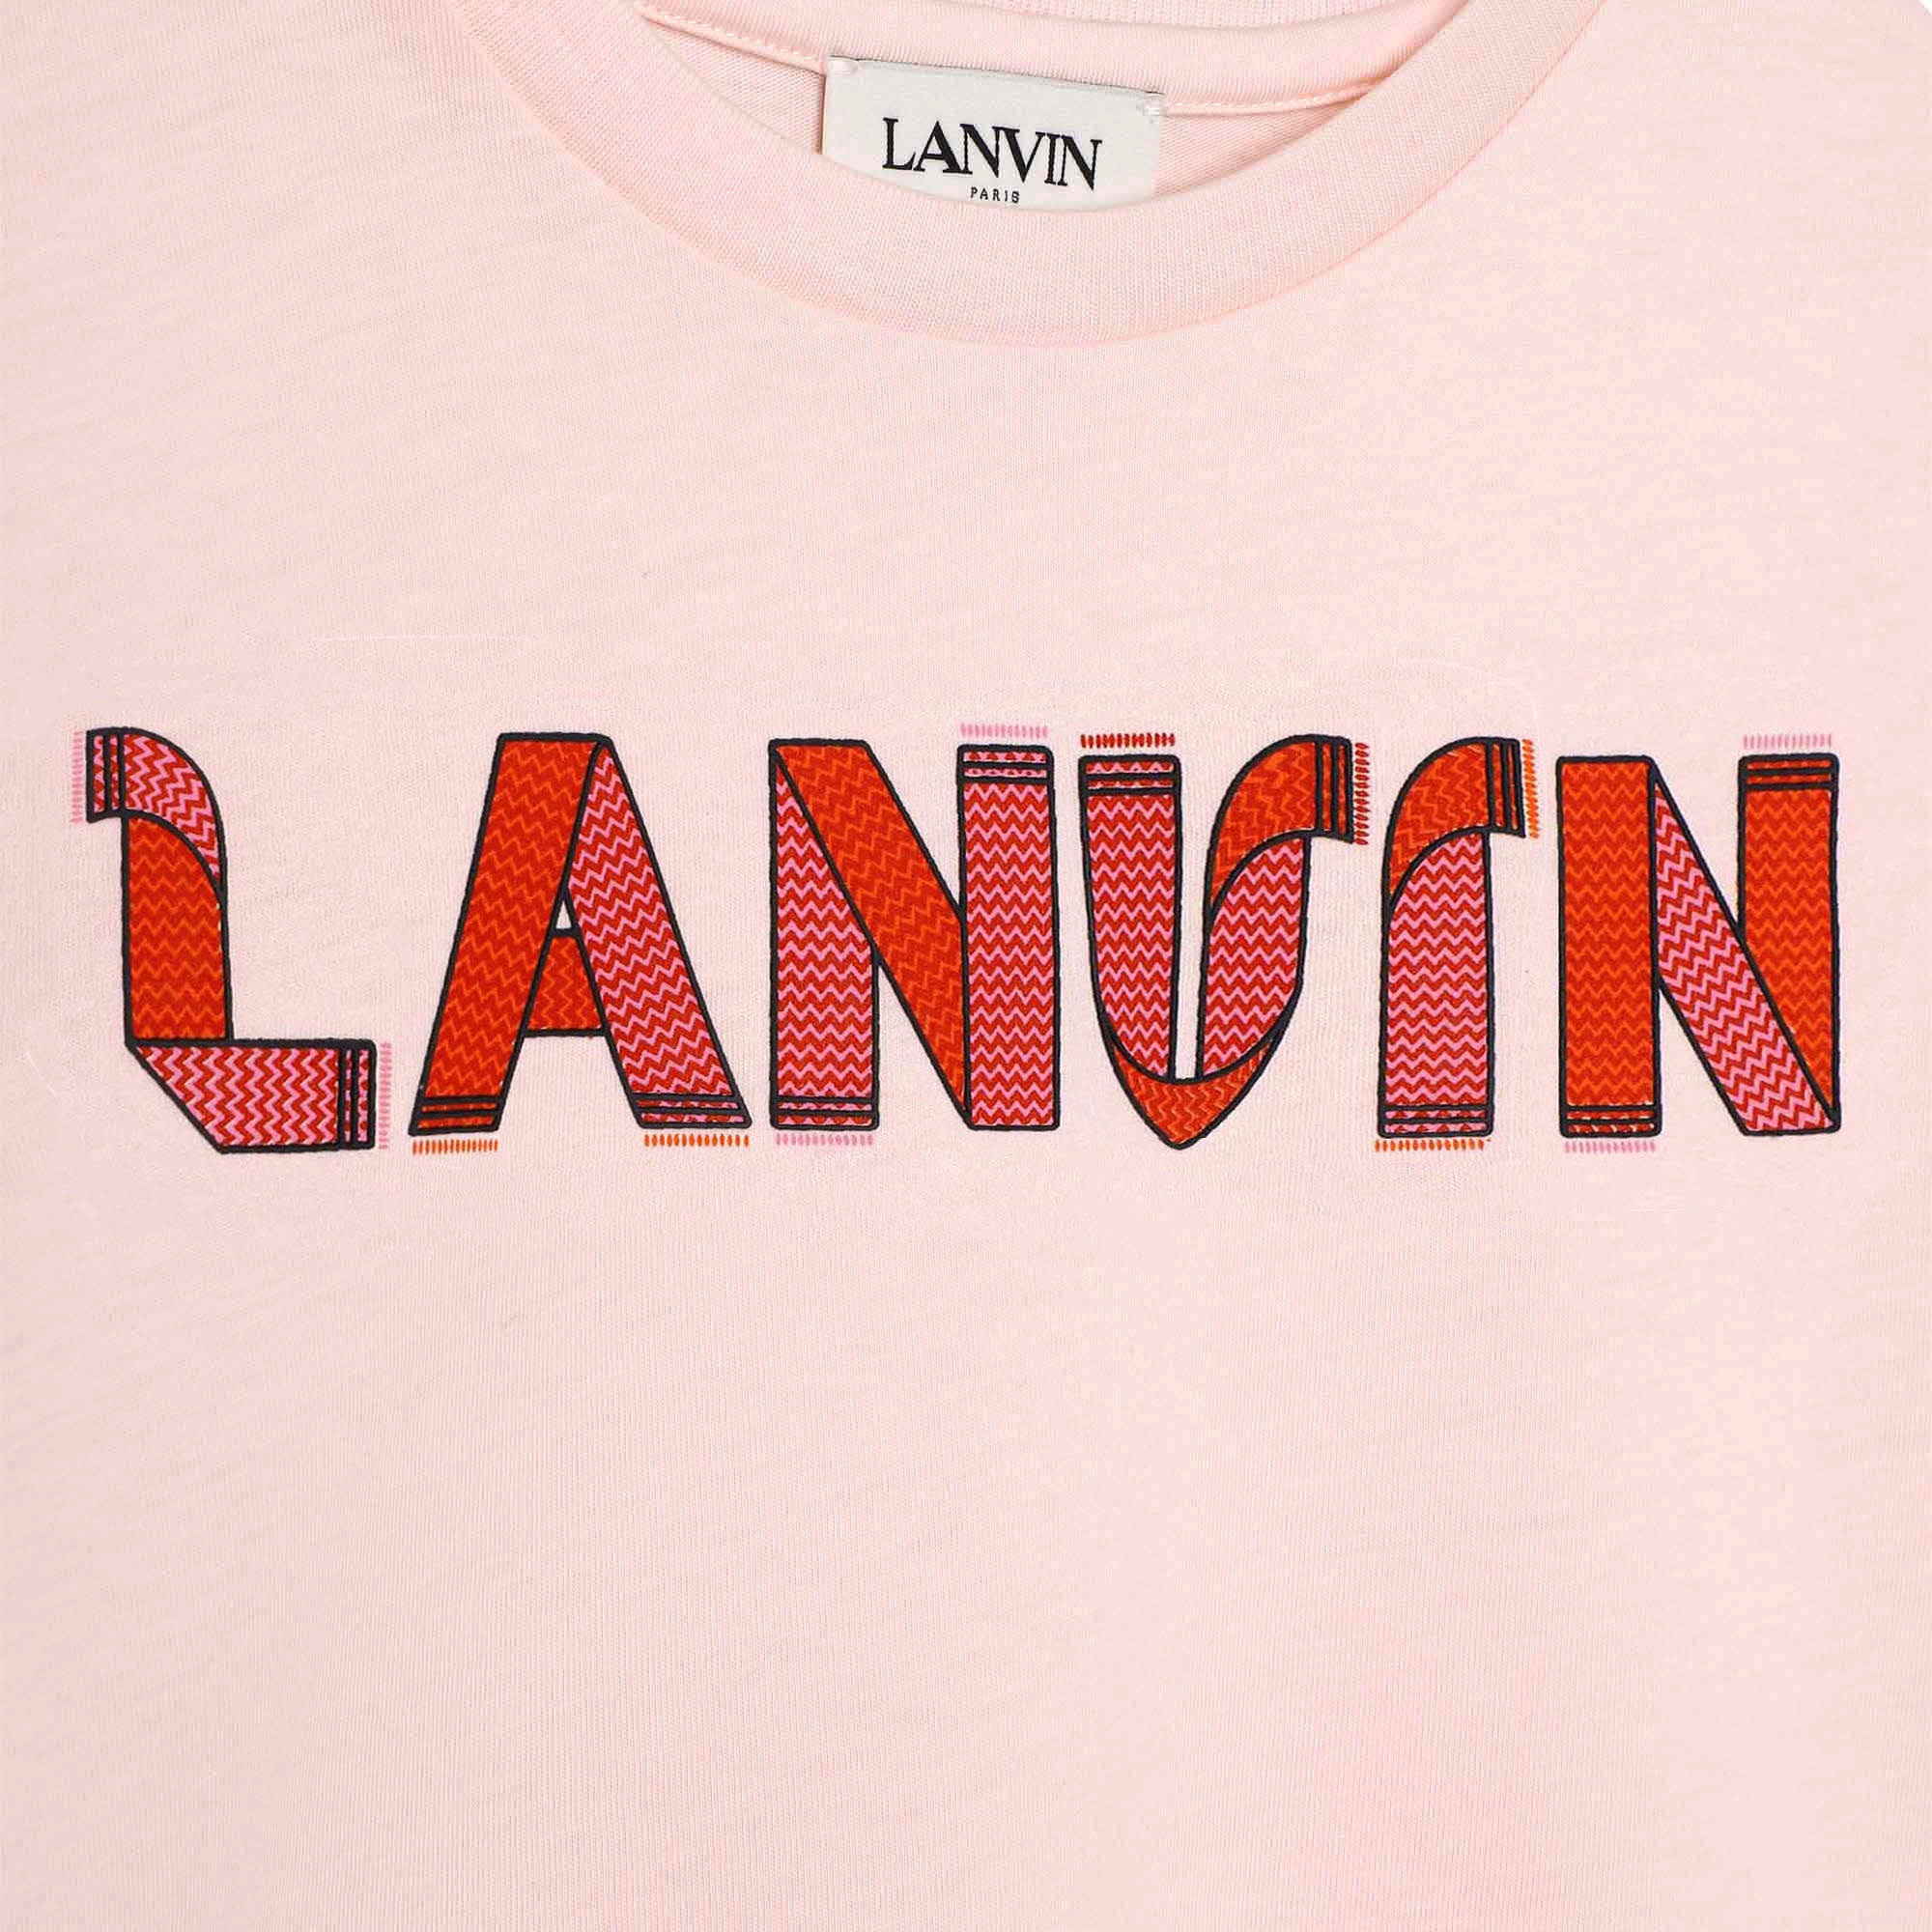 Lace-style printed T-shirt LANVIN for GIRL